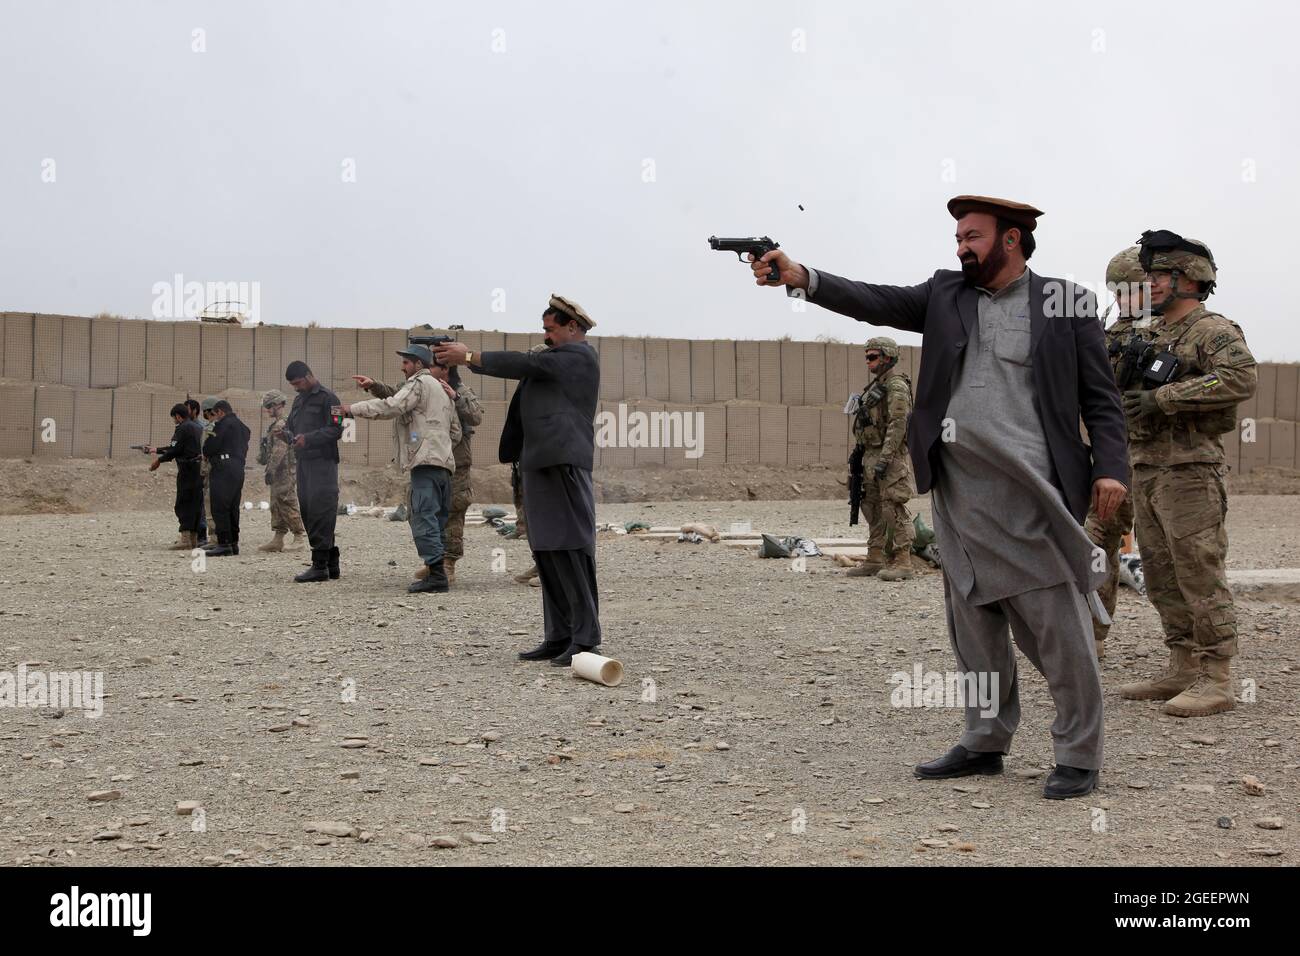 Afghan National Directorate of Security employees and Afghan Uniformed Policemen, stationed in Khost city, fire M-9 Beretta pistols on a small arms range on Camp Parsa, Khowst province, Afghanistan, Jan. 30, 2013. U.S. Army Soldiers assigned to Security Forces Advise and Assist Team 28, Task Force 3/101, planned the range and assisted the AUP and NDS with safely practicing with their weapons. (U.S. Army photo by Sgt. Kimberly Trumbull / Released) Stock Photo